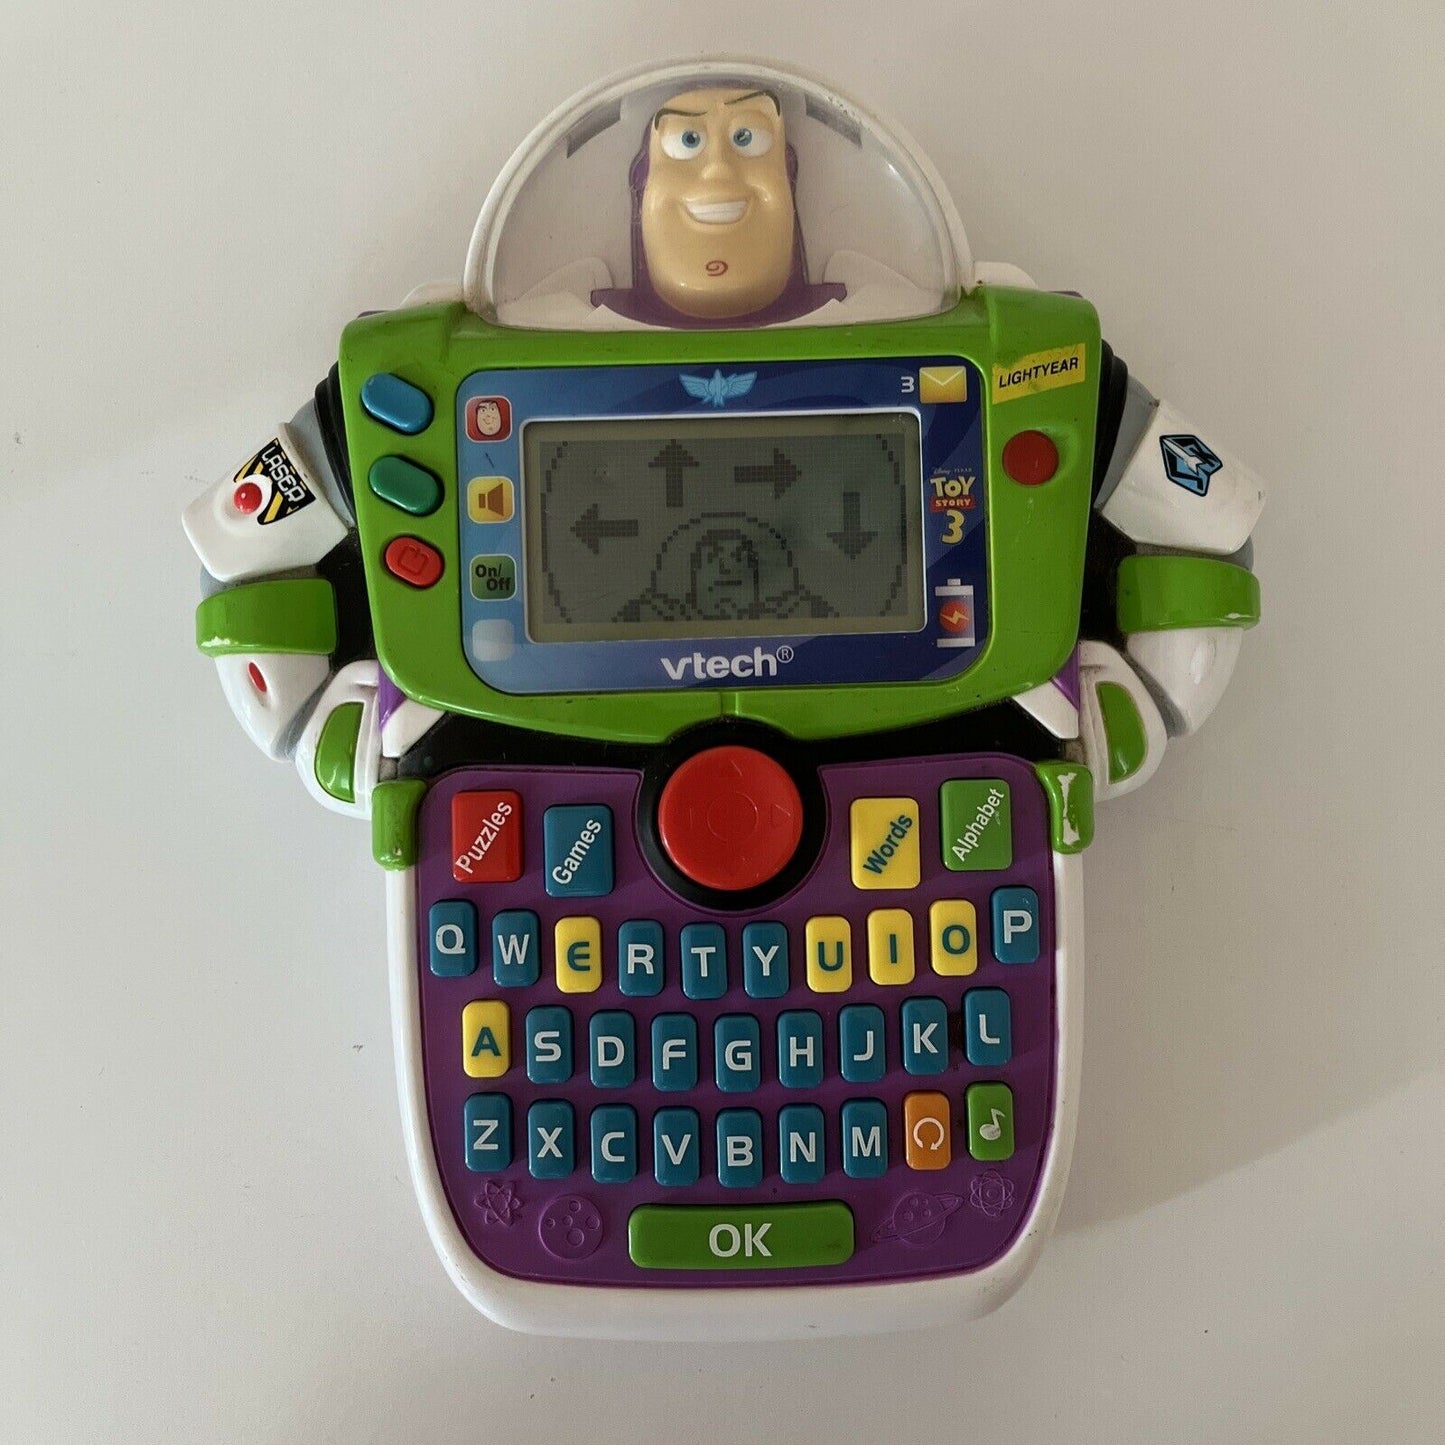 Vtech Toy Story Buzz Lightyear Learn & Go Handheld Game